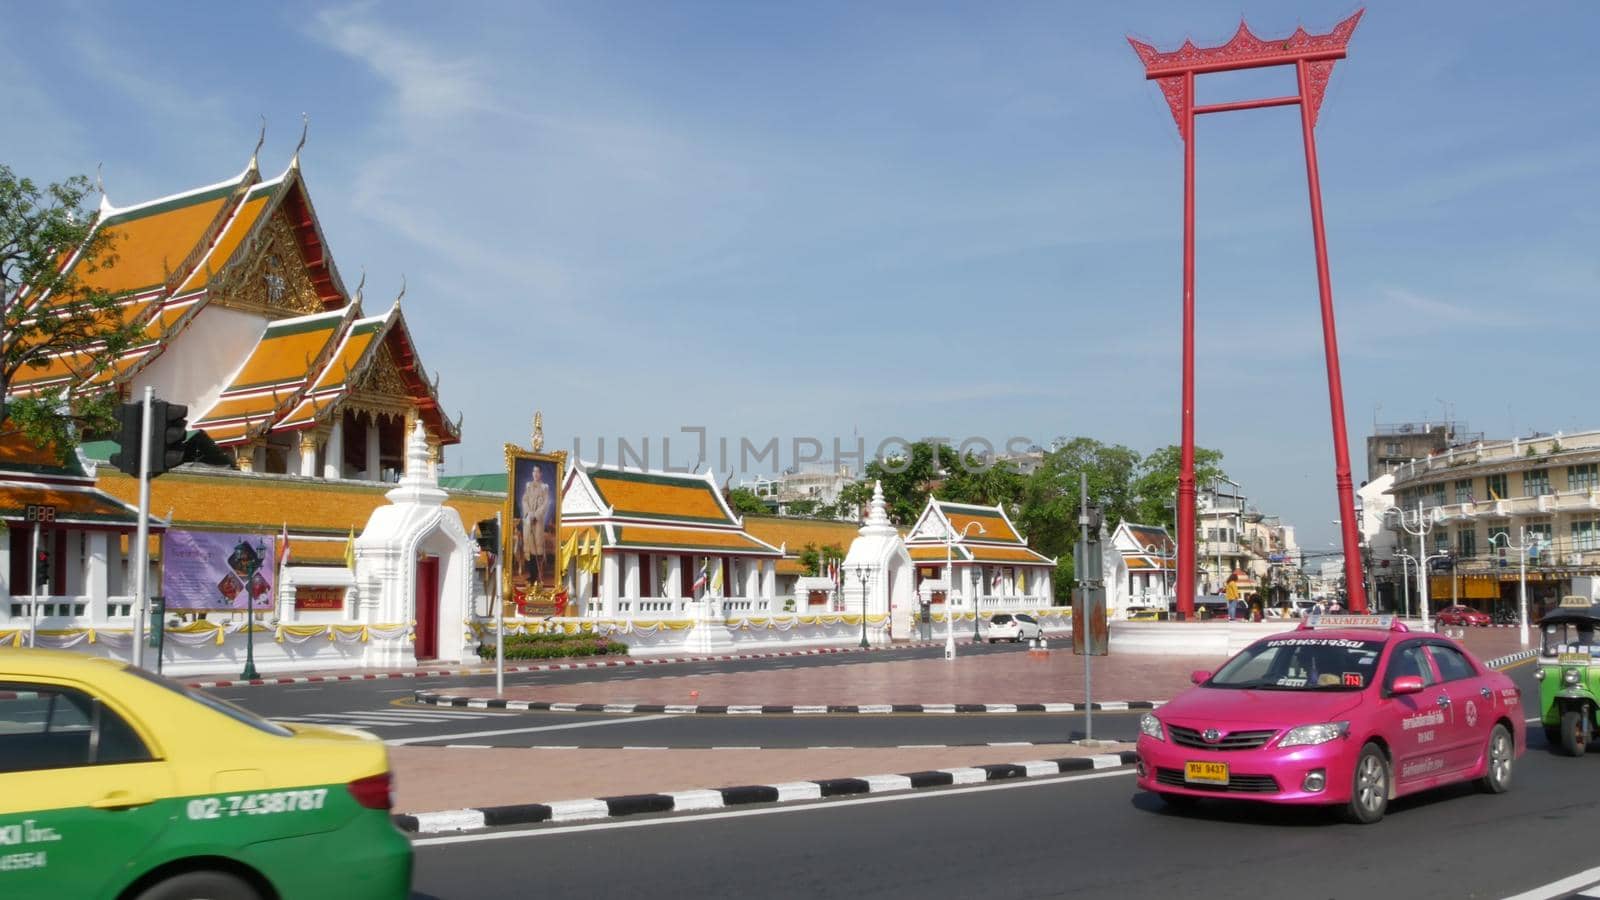 BANGKOK, THAILAND - 11 JULY, 2019: Giant Swing religios historic monument near traditional wat Suthat buddist temple. Iconic city view, cultural symbol. Famous landmark and classic tourist attraction